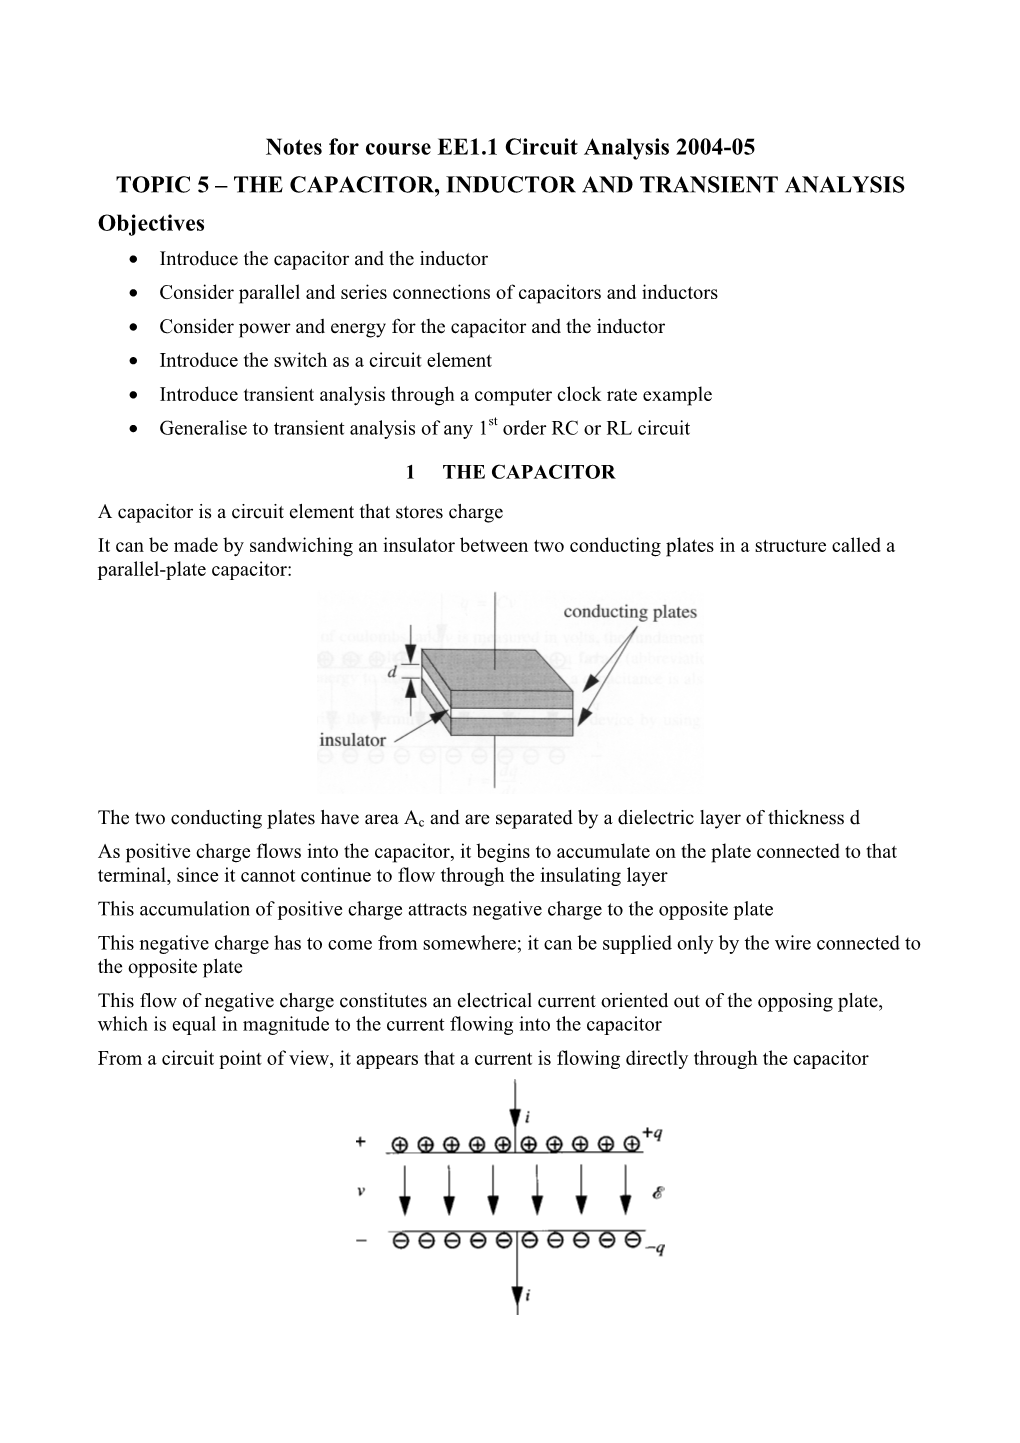 THE CAPACITOR, INDUCTOR and TRANSIENT ANALYSIS Objectives